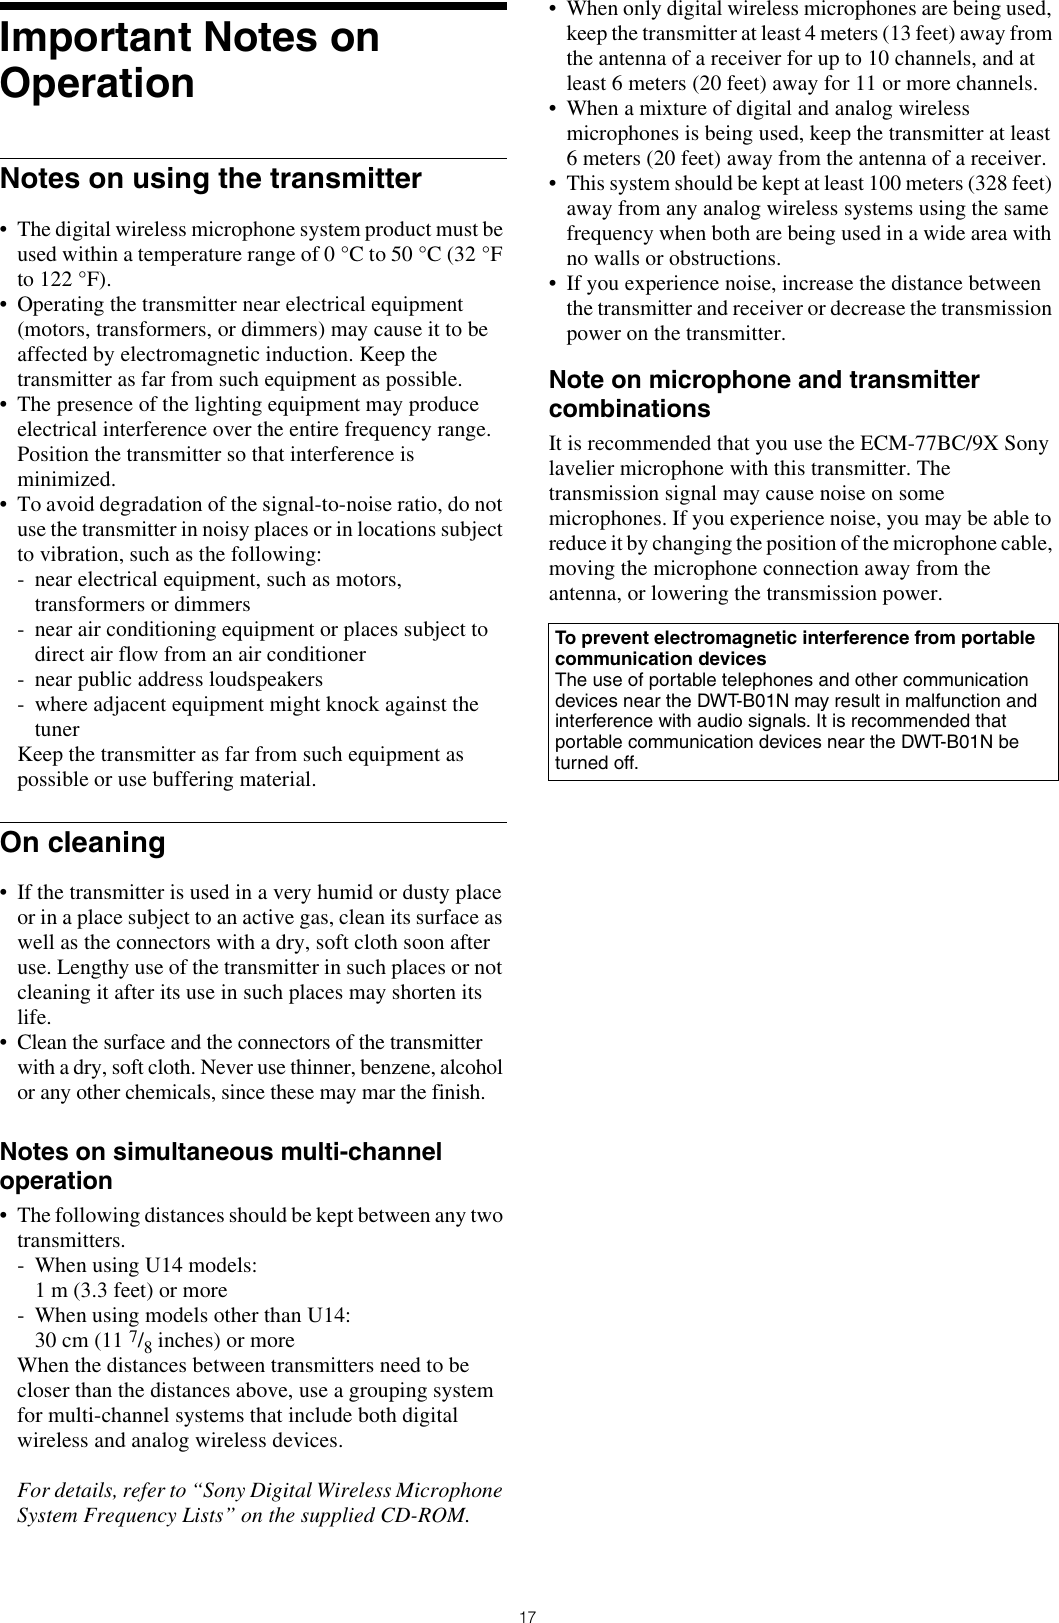 17Important Notes on OperationNotes on using the transmitter• The digital wireless microphone system product must be used within a temperature range of 0 °C to 50 °C (32 °F to 122 °F).• Operating the transmitter near electrical equipment (motors, transformers, or dimmers) may cause it to be affected by electromagnetic induction. Keep the transmitter as far from such equipment as possible.• The presence of the lighting equipment may produce electrical interference over the entire frequency range. Position the transmitter so that interference is minimized.• To avoid degradation of the signal-to-noise ratio, do not use the transmitter in noisy places or in locations subject to vibration, such as the following:- near electrical equipment, such as motors, transformers or dimmers- near air conditioning equipment or places subject to direct air flow from an air conditioner- near public address loudspeakers- where adjacent equipment might knock against the tunerKeep the transmitter as far from such equipment as possible or use buffering material.On cleaning• If the transmitter is used in a very humid or dusty place or in a place subject to an active gas, clean its surface as well as the connectors with a dry, soft cloth soon after use. Lengthy use of the transmitter in such places or not cleaning it after its use in such places may shorten its life.• Clean the surface and the connectors of the transmitter with a dry, soft cloth. Never use thinner, benzene, alcohol or any other chemicals, since these may mar the finish.Notes on simultaneous multi-channel operation• The following distances should be kept between any two transmitters.- When using U14 models:1 m (3.3 feet) or more- When using models other than U14:30 cm (11 7/8 inches) or moreWhen the distances between transmitters need to be closer than the distances above, use a grouping system for multi-channel systems that include both digital wireless and analog wireless devices.For details, refer to “Sony Digital Wireless Microphone System Frequency Lists” on the supplied CD-ROM.• When only digital wireless microphones are being used, keep the transmitter at least 4 meters (13 feet) away from the antenna of a receiver for up to 10 channels, and at least 6 meters (20 feet) away for 11 or more channels.• When a mixture of digital and analog wireless microphones is being used, keep the transmitter at least 6 meters (20 feet) away from the antenna of a receiver.• This system should be kept at least 100 meters (328 feet) away from any analog wireless systems using the same frequency when both are being used in a wide area with no walls or obstructions.• If you experience noise, increase the distance between the transmitter and receiver or decrease the transmission power on the transmitter.Note on microphone and transmitter combinationsIt is recommended that you use the ECM-77BC/9X Sony lavelier microphone with this transmitter. The transmission signal may cause noise on some microphones. If you experience noise, you may be able to reduce it by changing the position of the microphone cable, moving the microphone connection away from the antenna, or lowering the transmission power.To prevent electromagnetic interference from portable communication devicesThe use of portable telephones and other communication devices near the DWT-B01N may result in malfunction and interference with audio signals. It is recommended that portable communication devices near the DWT-B01N be turned off.